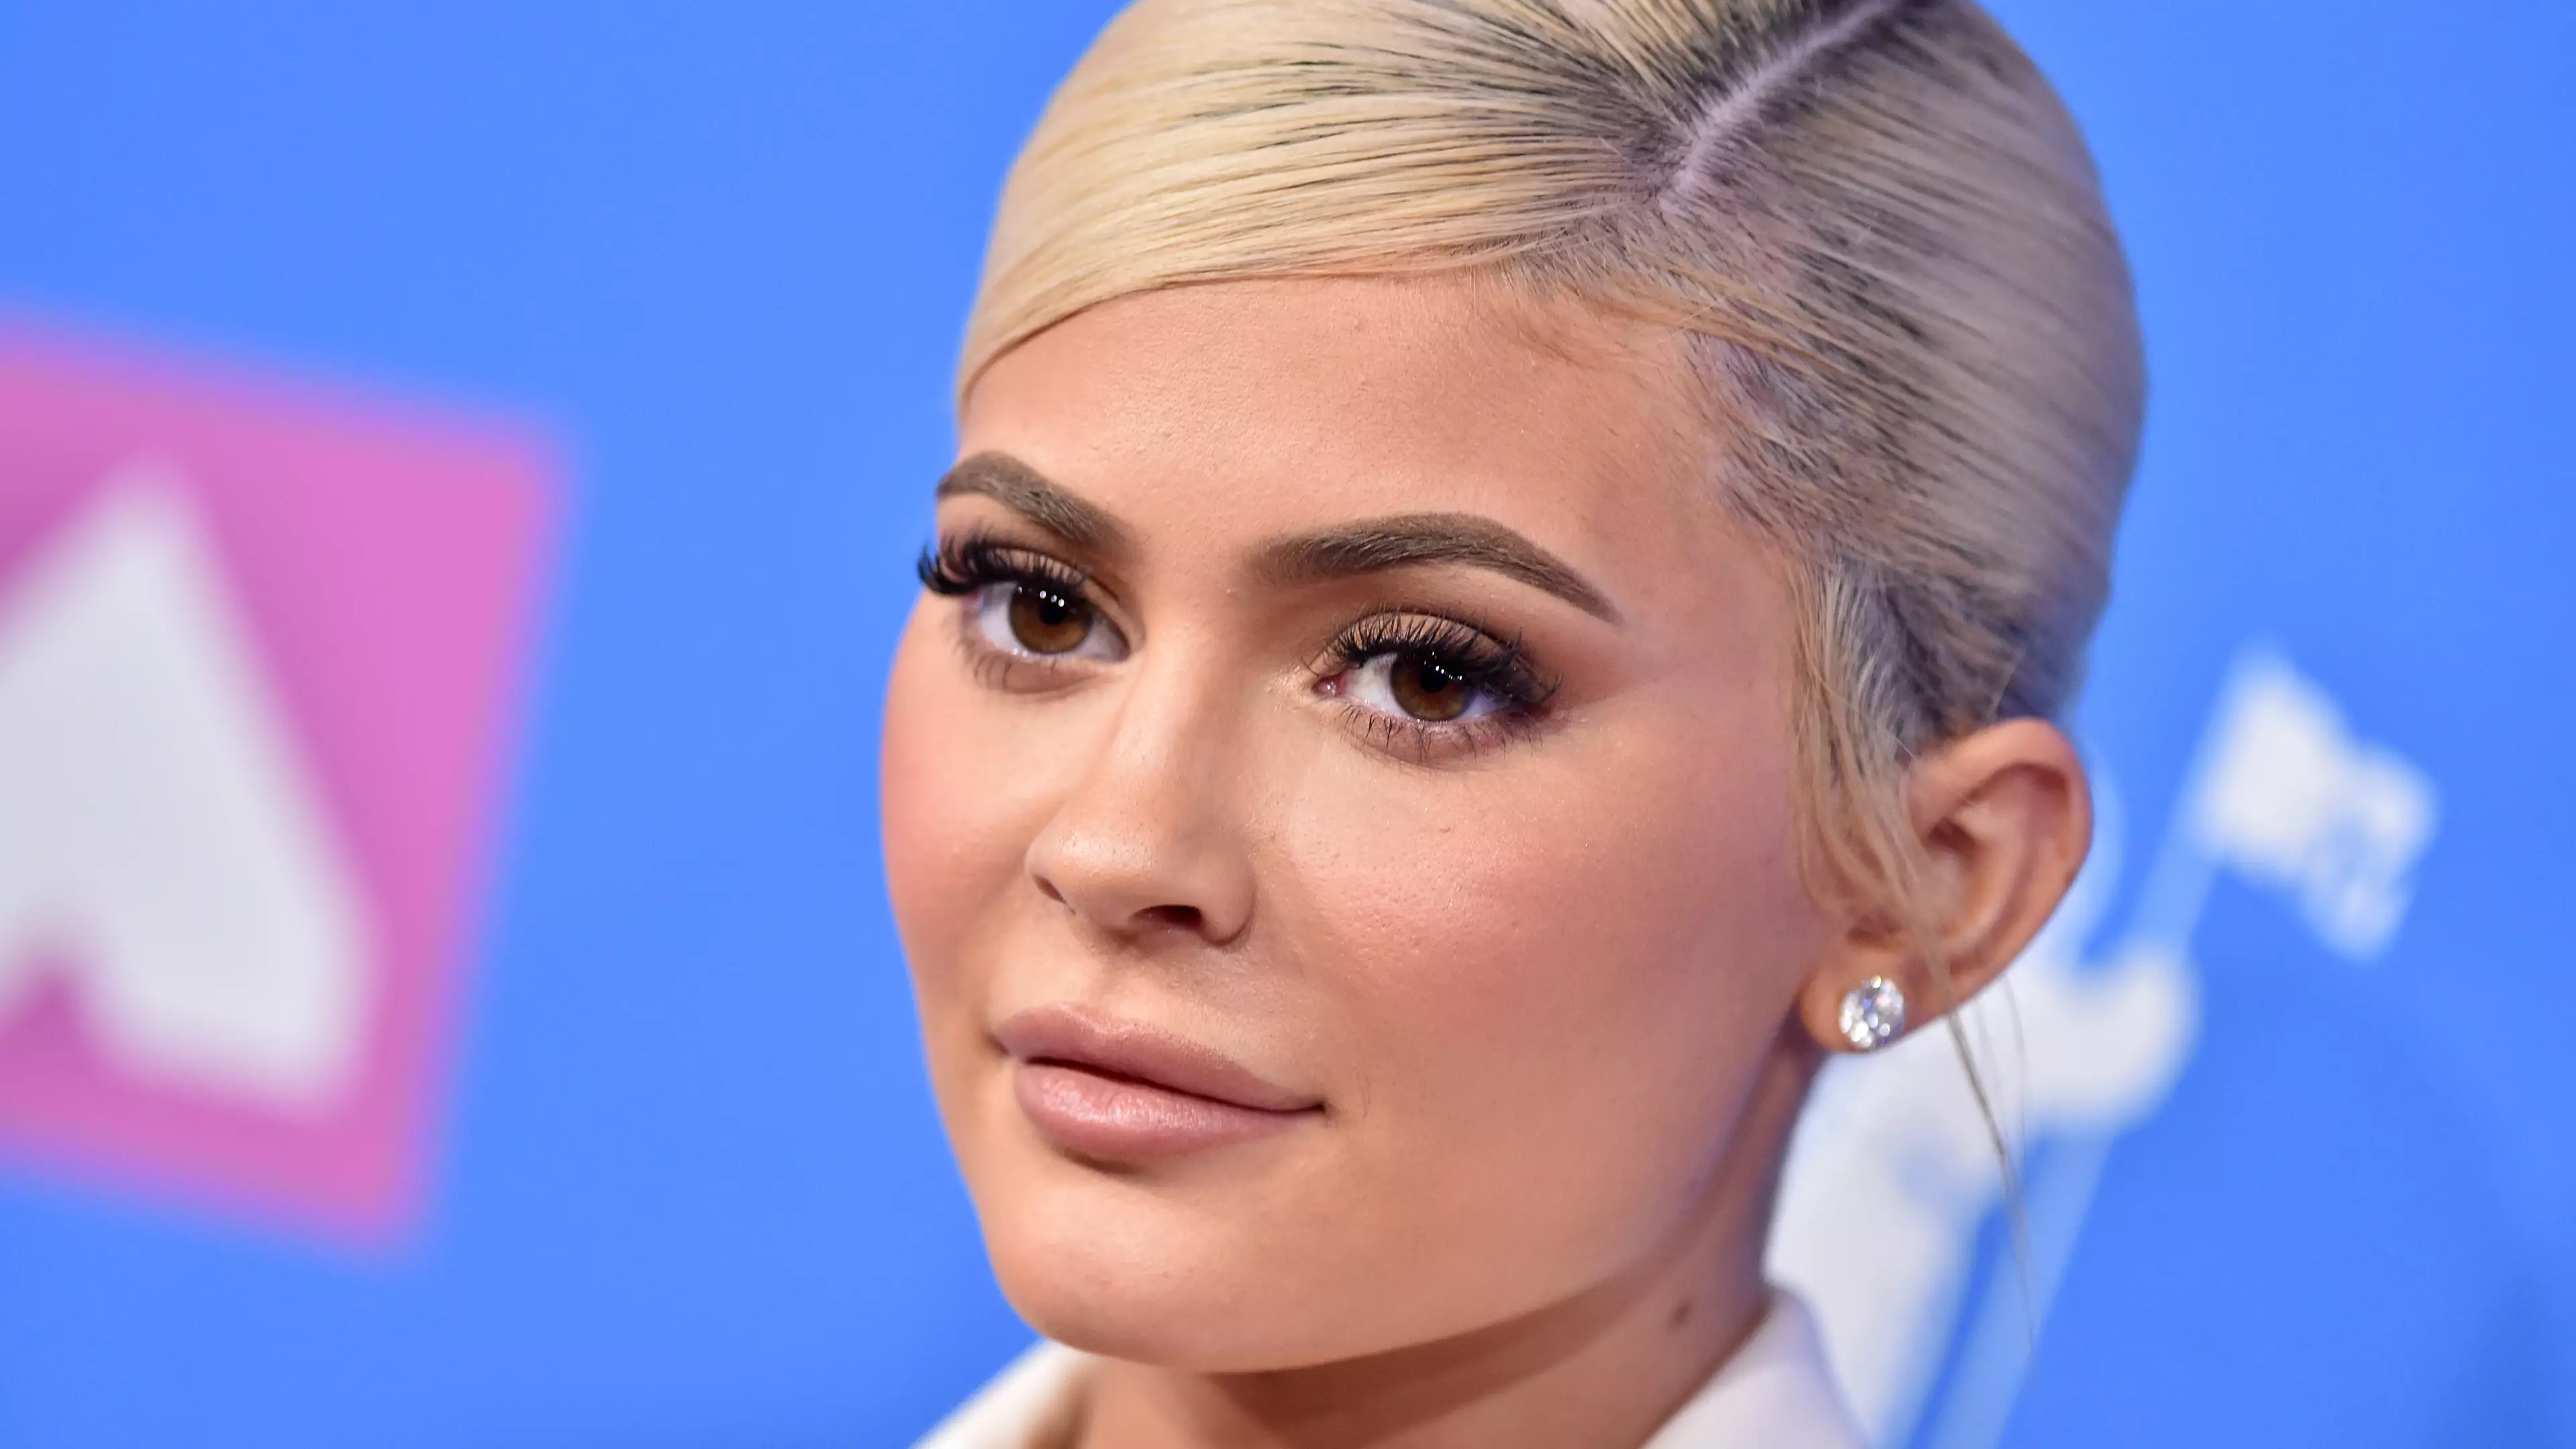 Kylie Jenner Accused Of Cultural Appropriation Over Hairstyle Photo